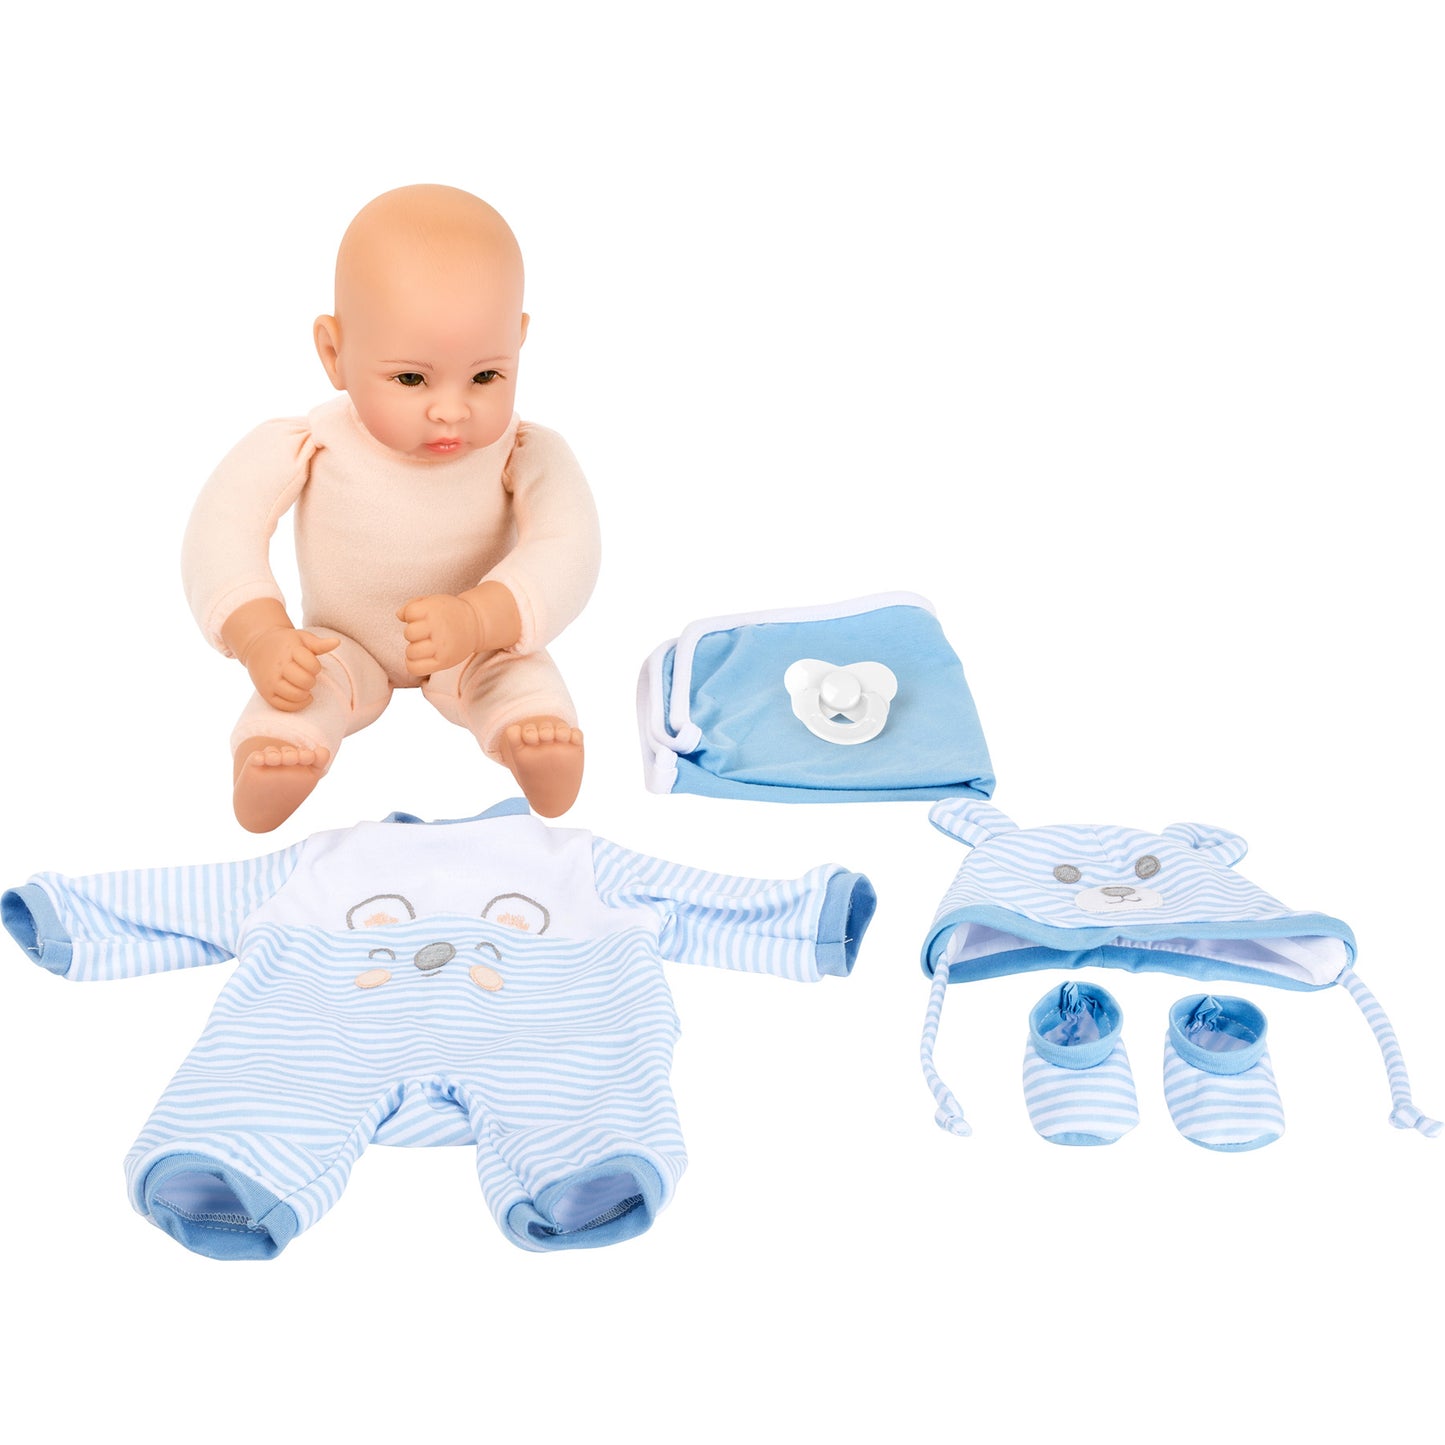 Baby Doll "Lukas" Playset